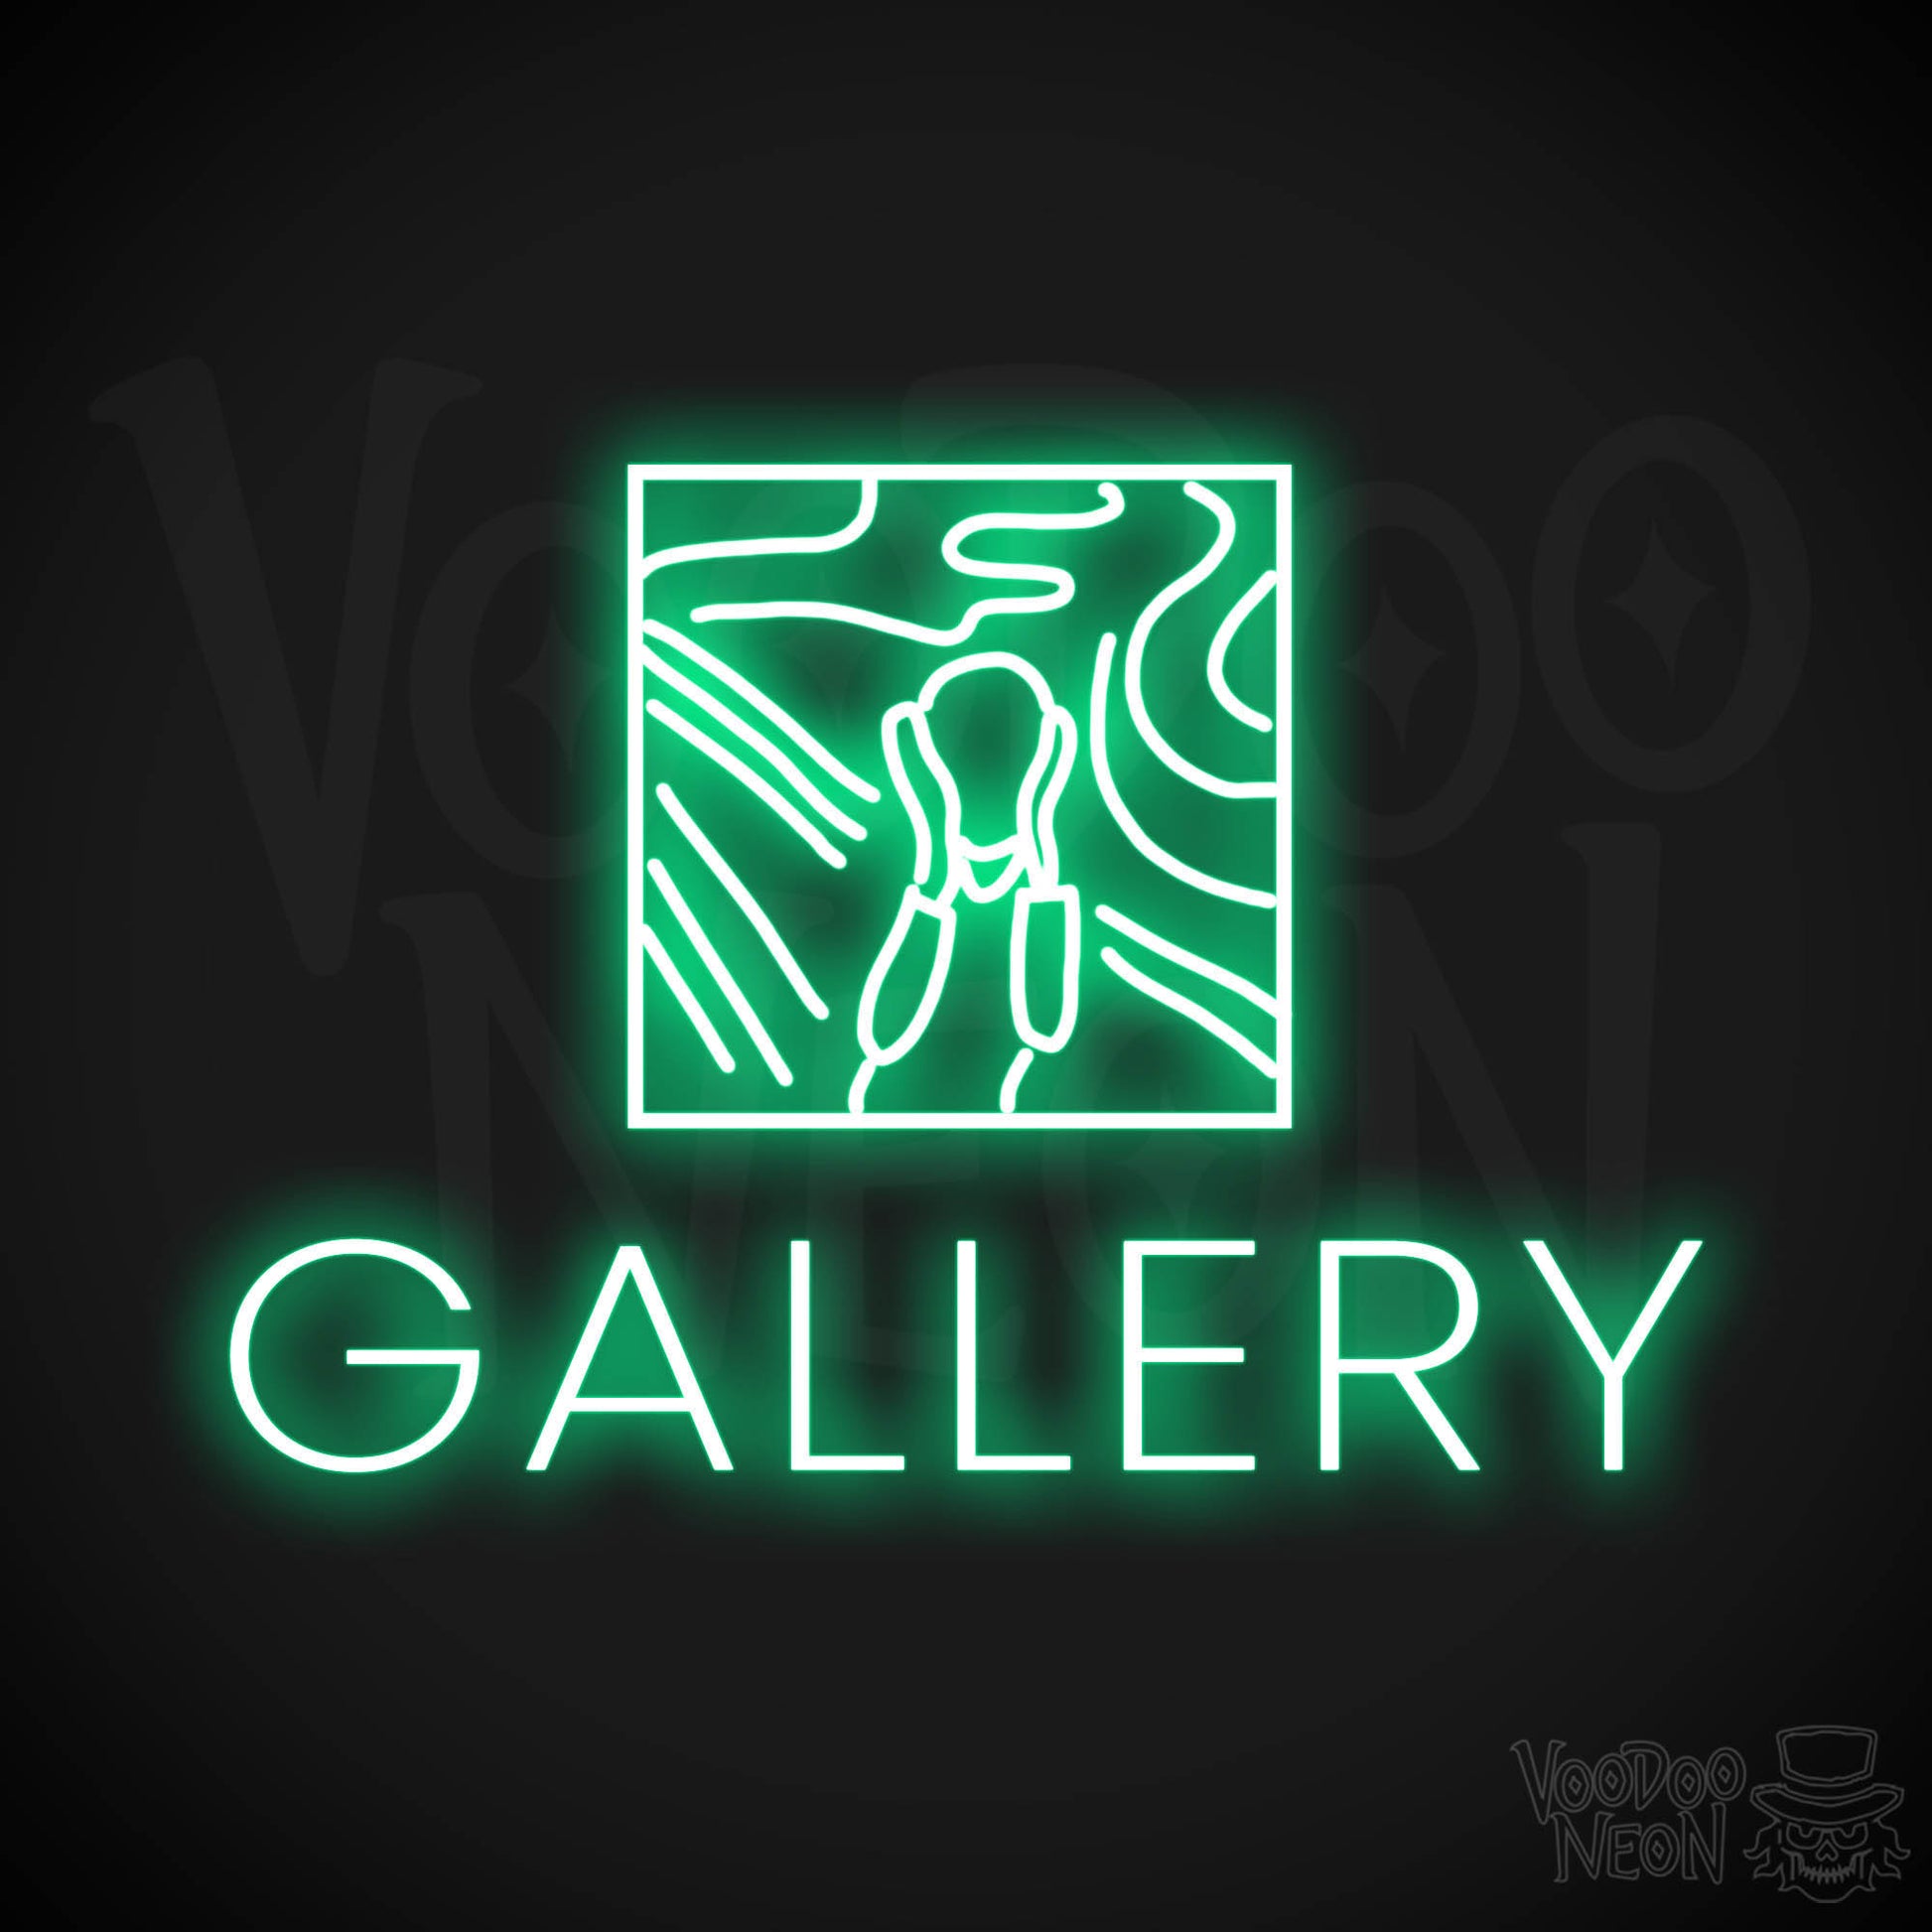 Gallery LED Neon - Green